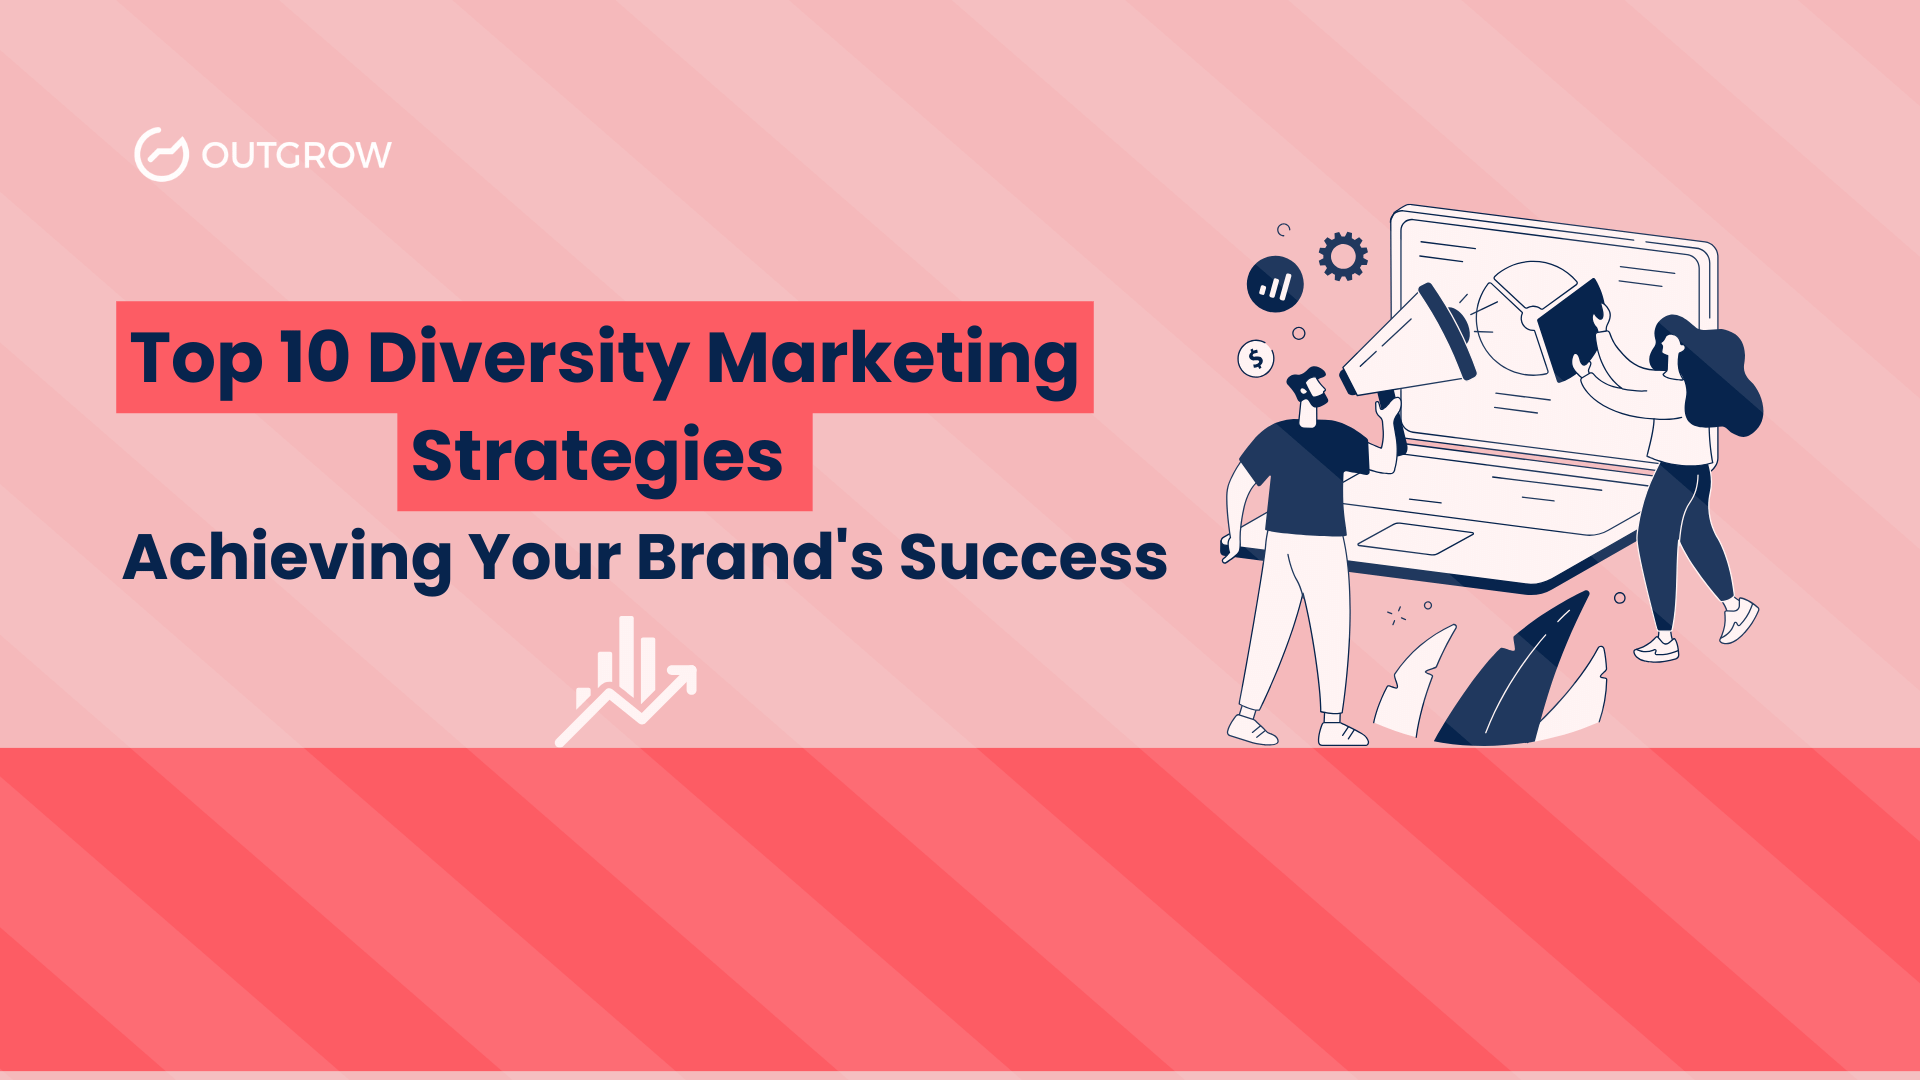 Top 10 Diversity Marketing Strategies for Your Brand Success